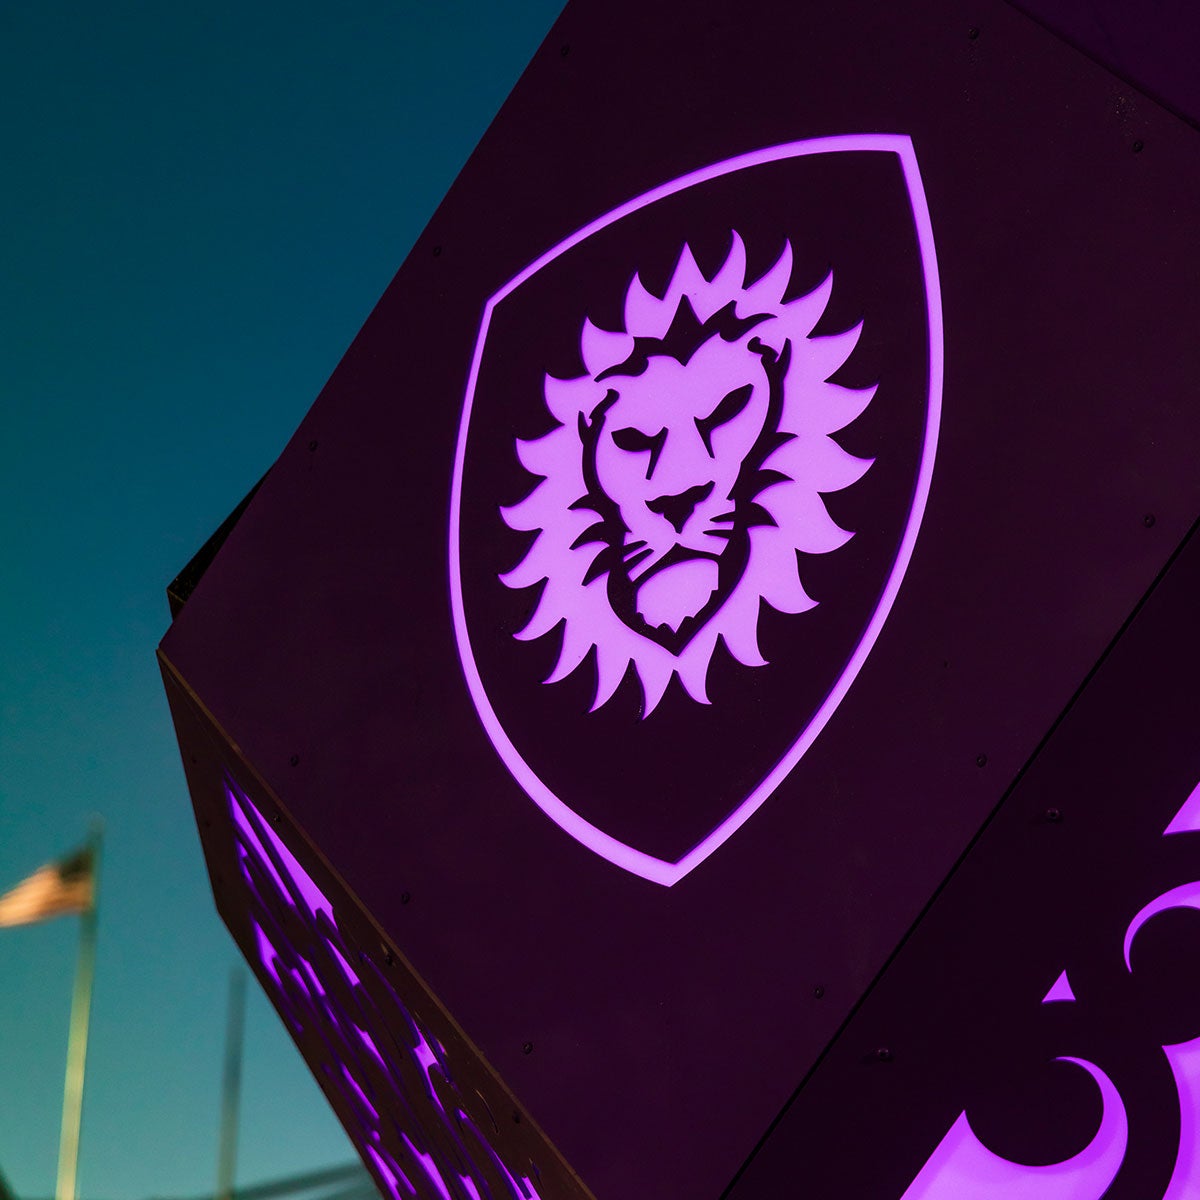 A light up panel on the solar sculpture that features the Orlando City logo.